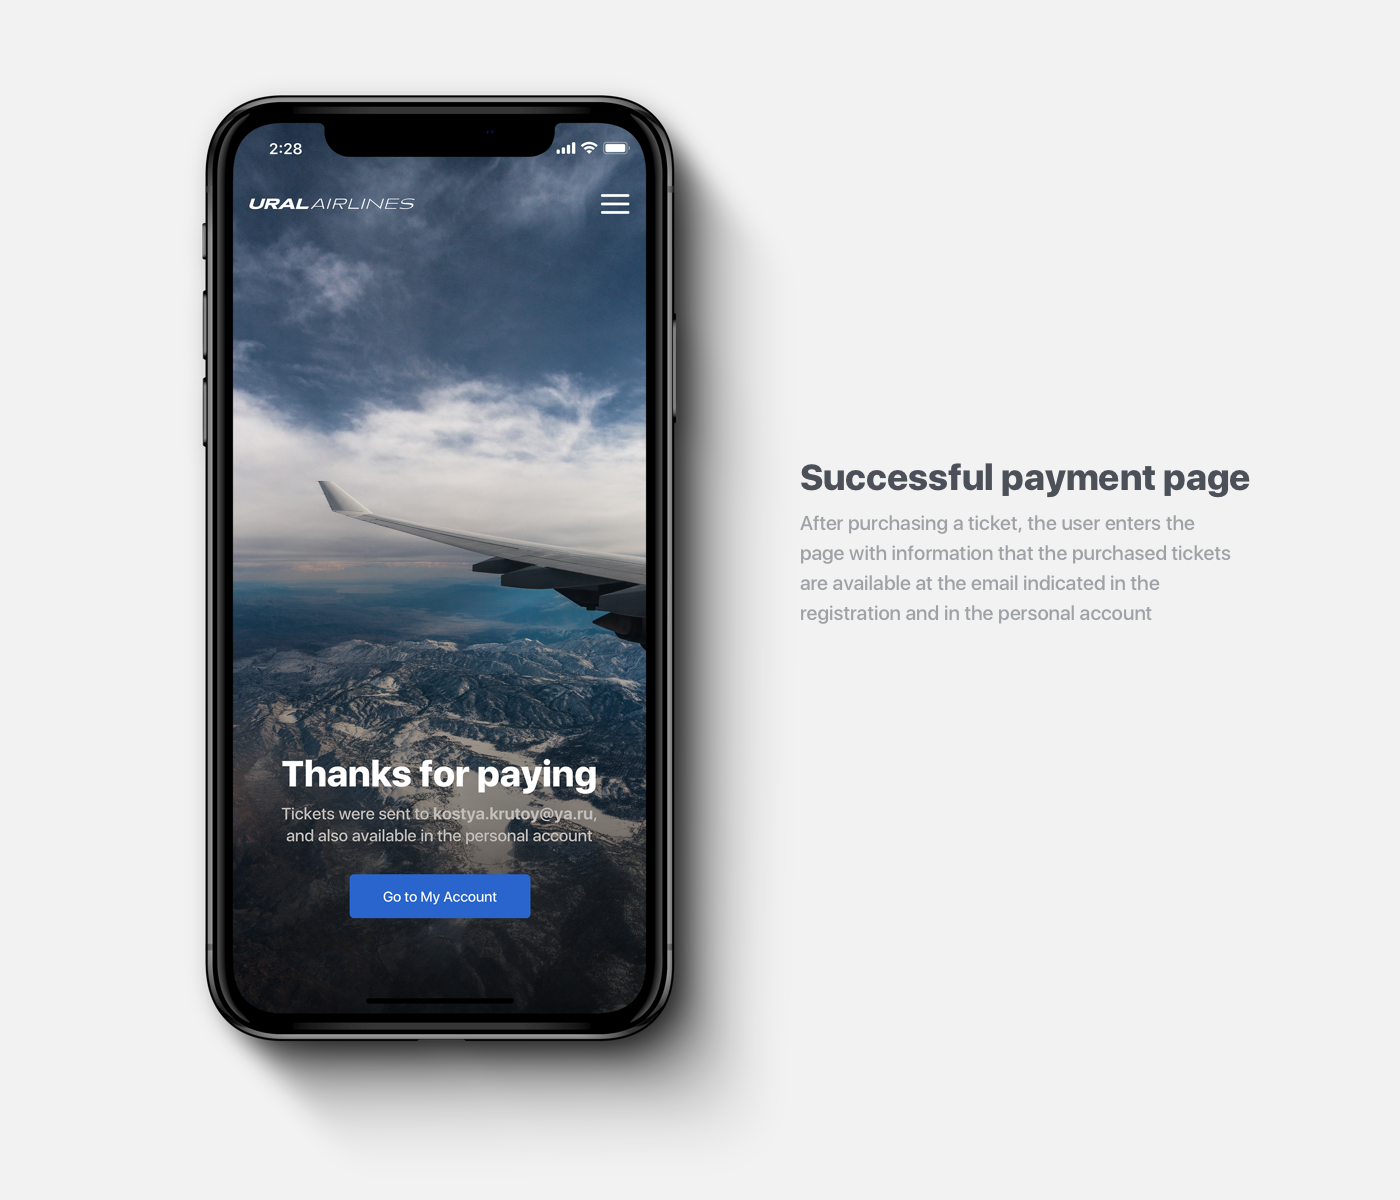 flight Booking Airlines airplane web-design interaction animation  Avia booking Travel ural